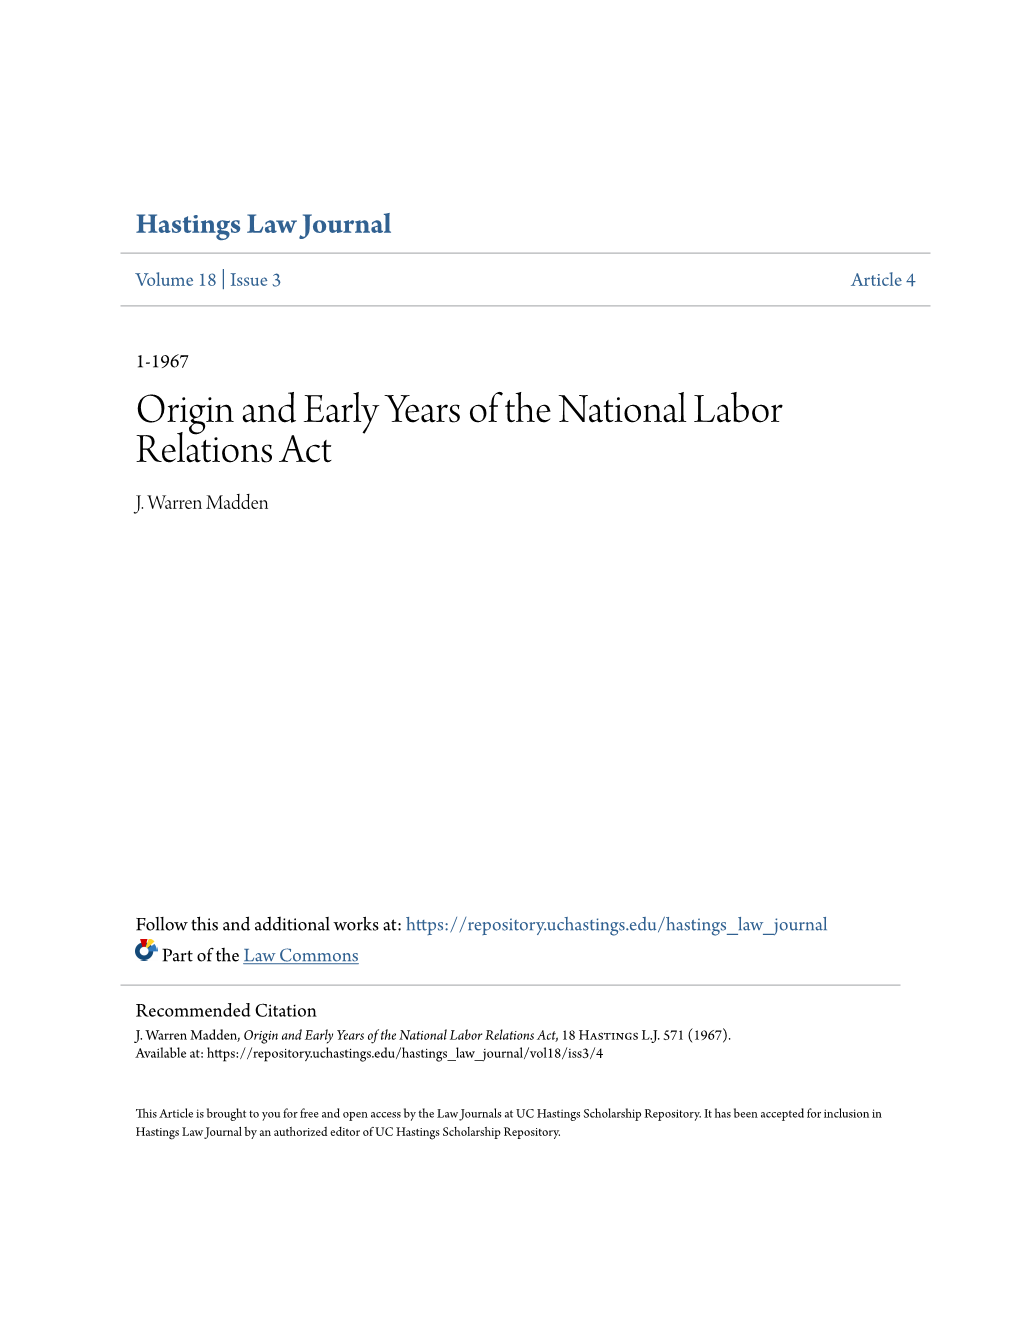 Origin and Early Years of the National Labor Relations Act J